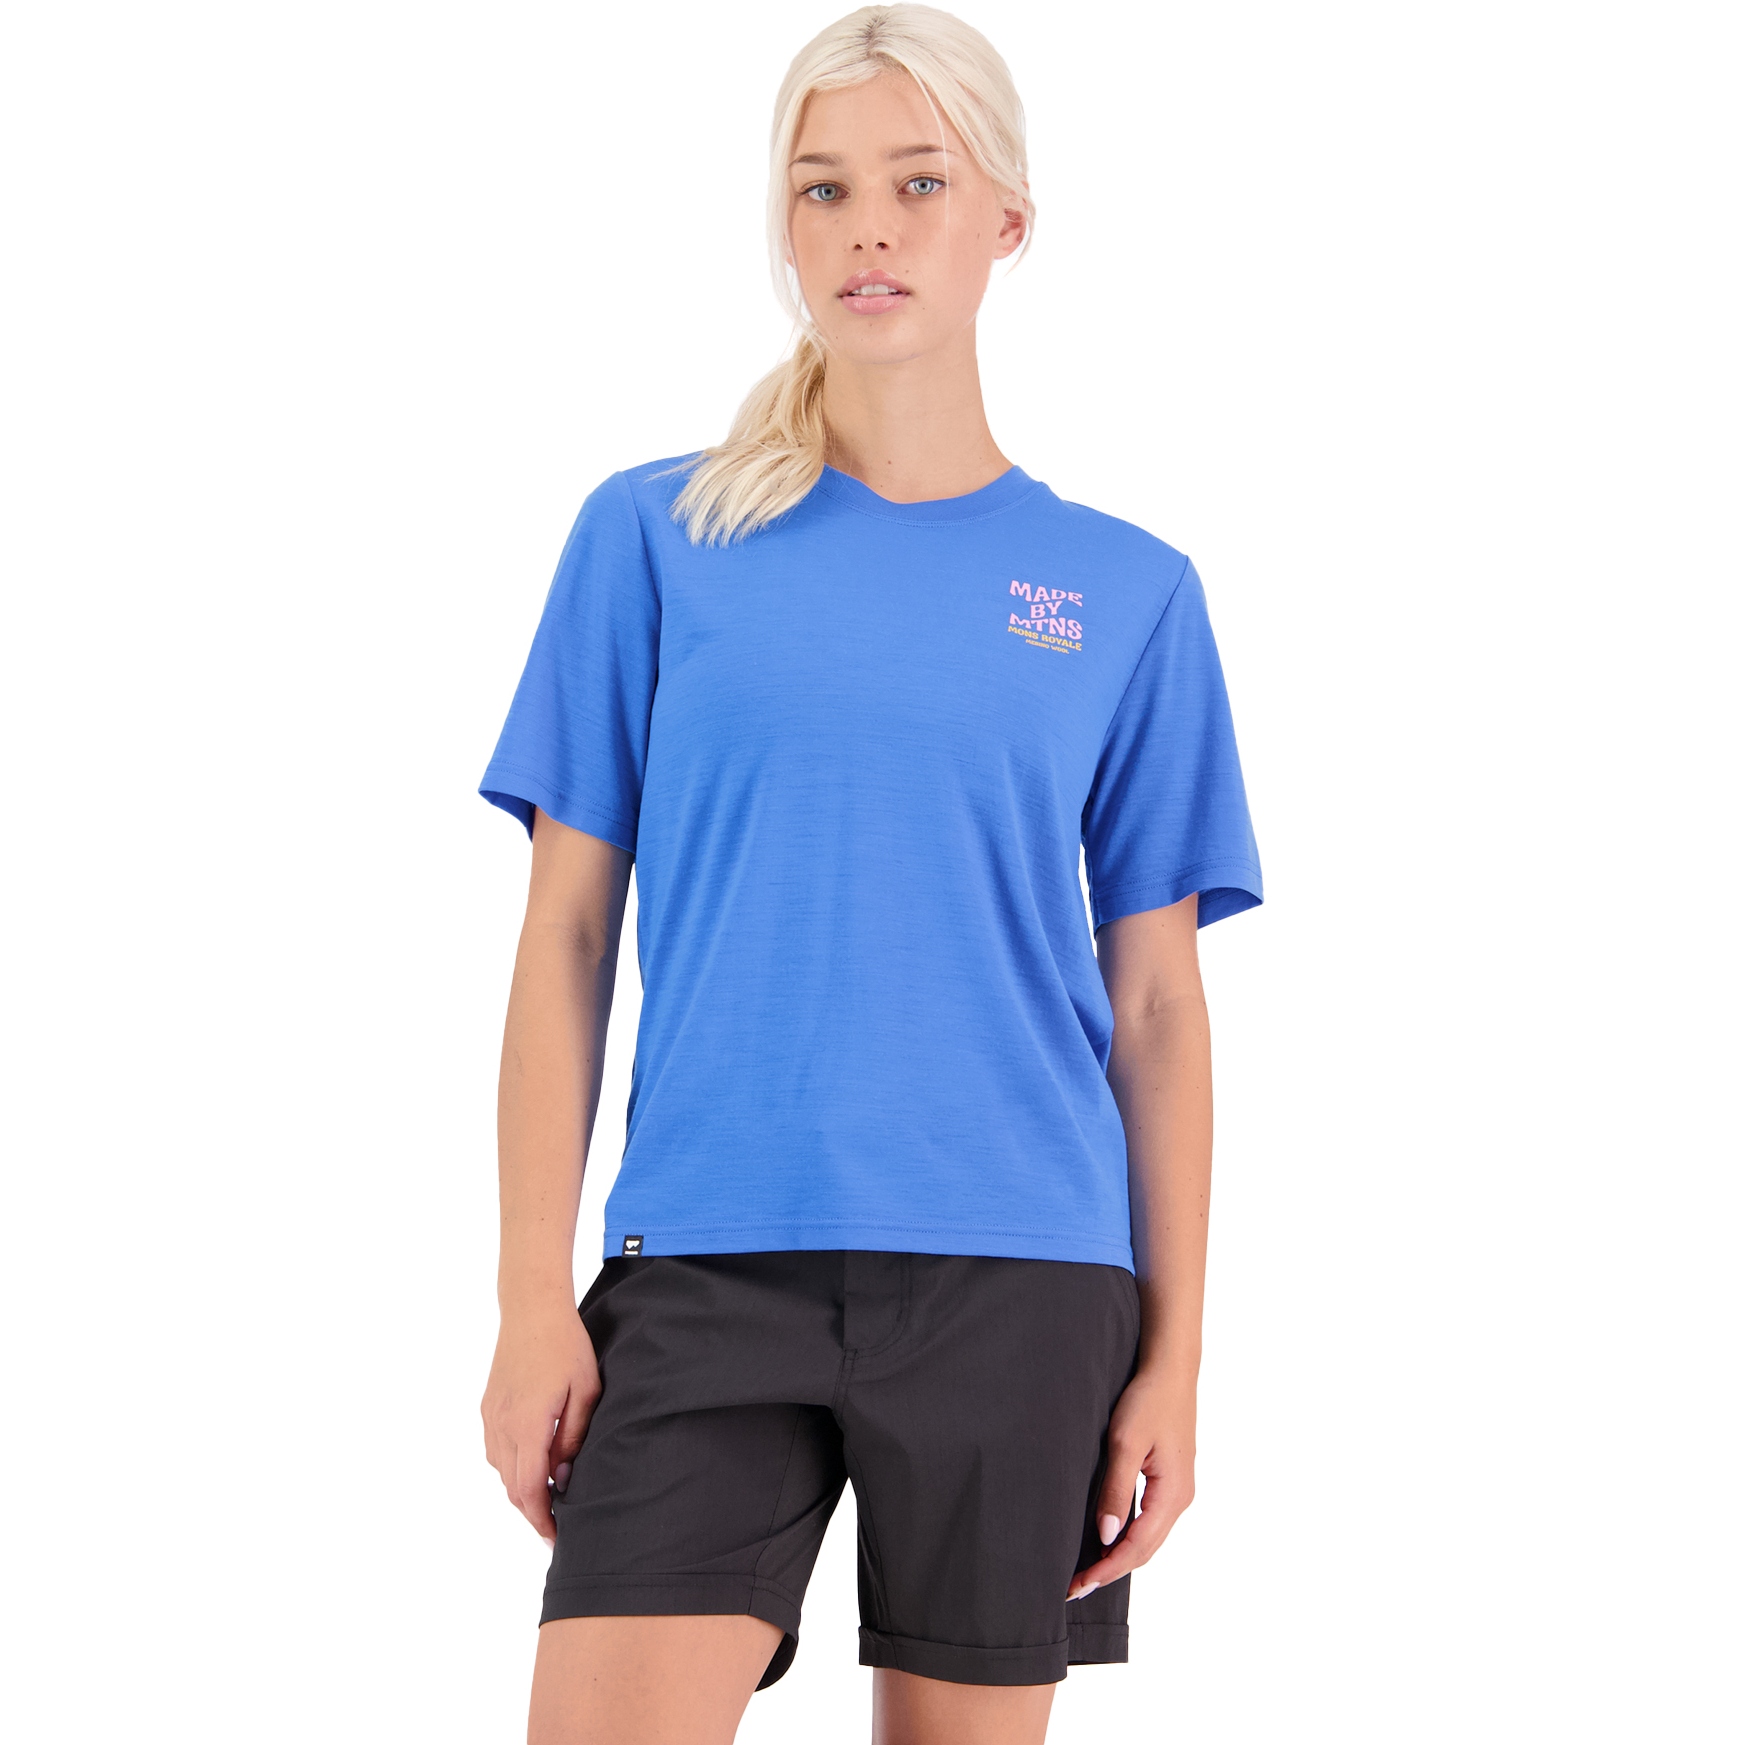 Productfoto van Mons Royale Icon Merino Air-Con Relaxed T-Shirt Dames - pop blue 1233